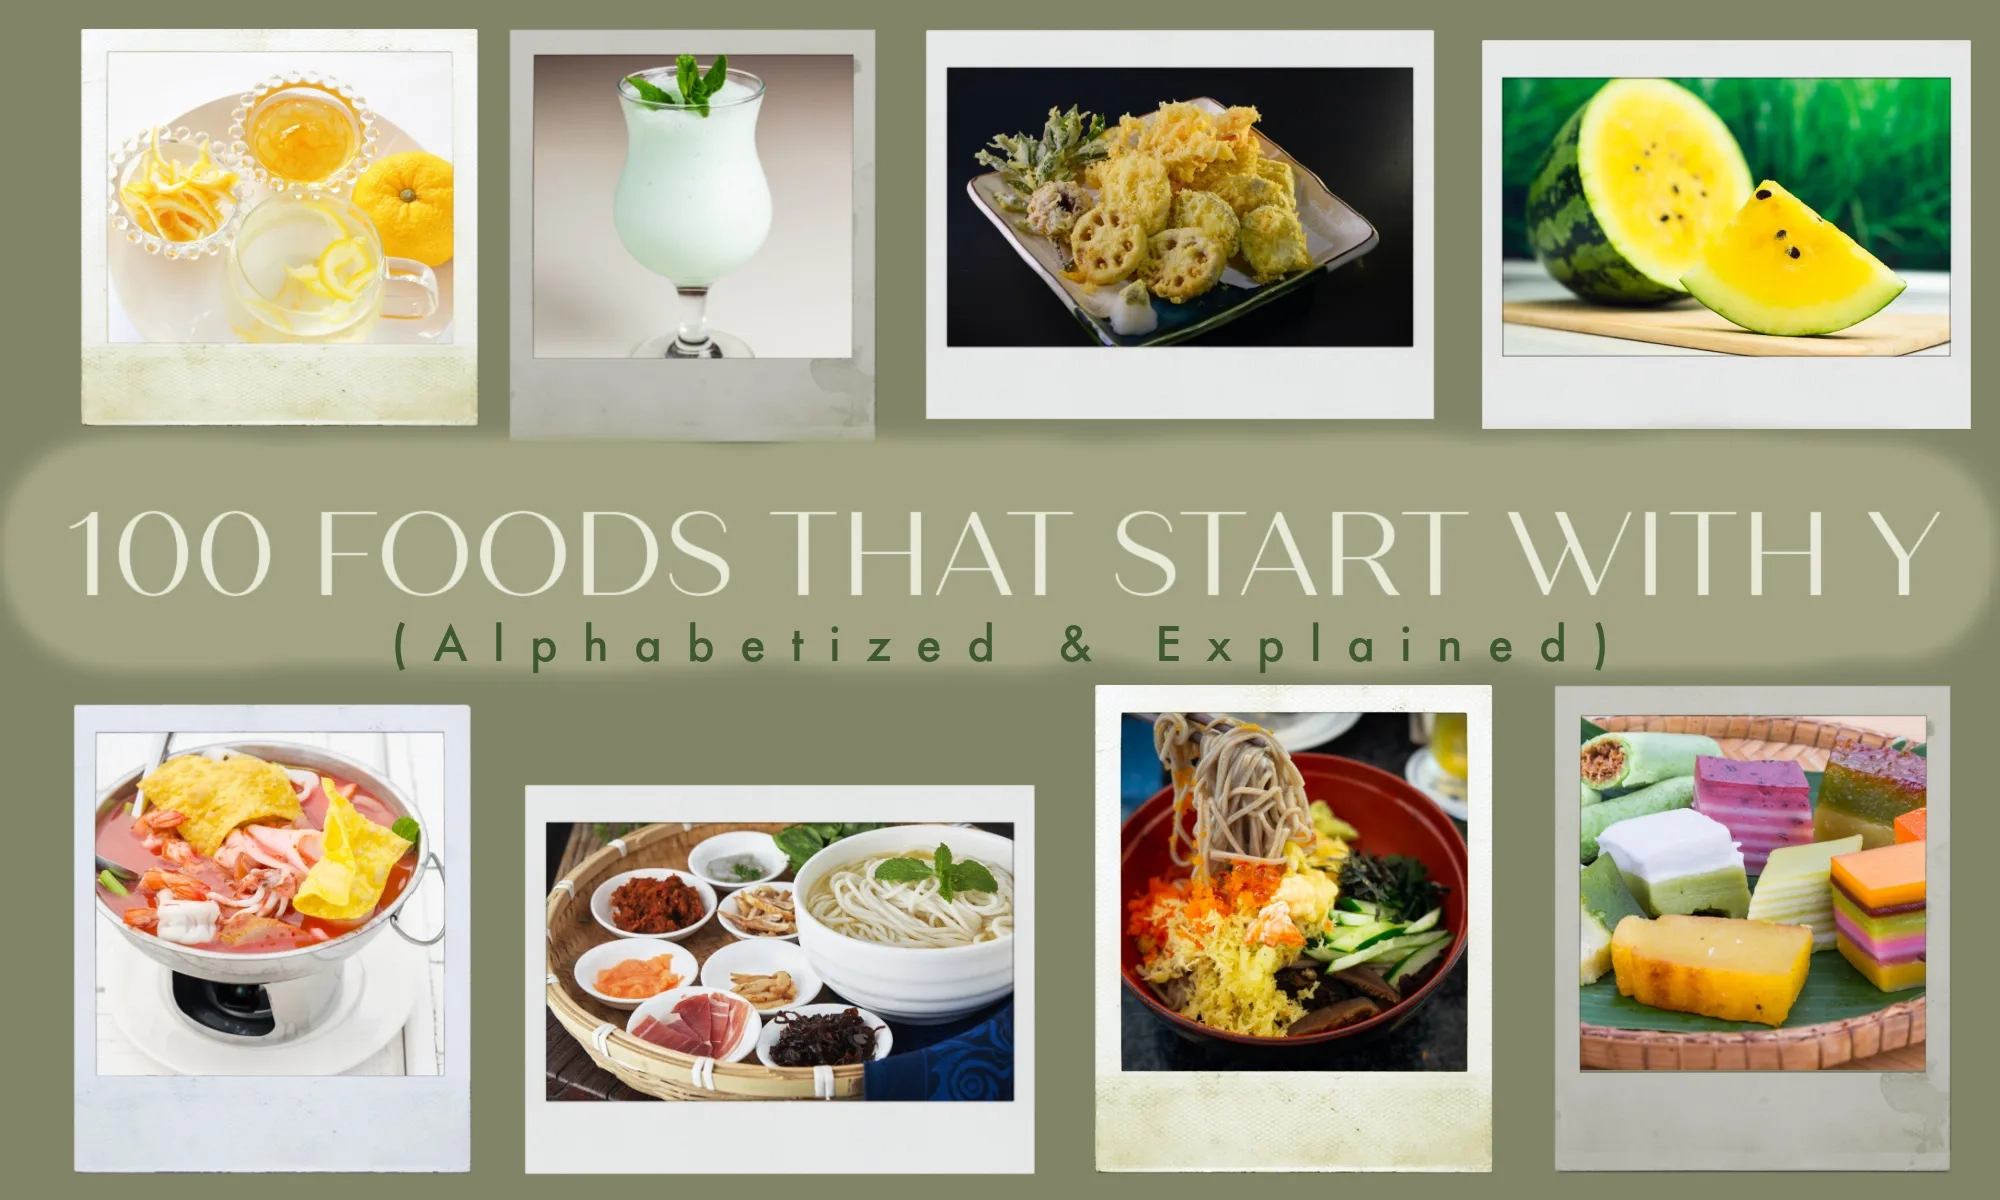 100 Foods That Start With Y (Alphabetized & Explained)